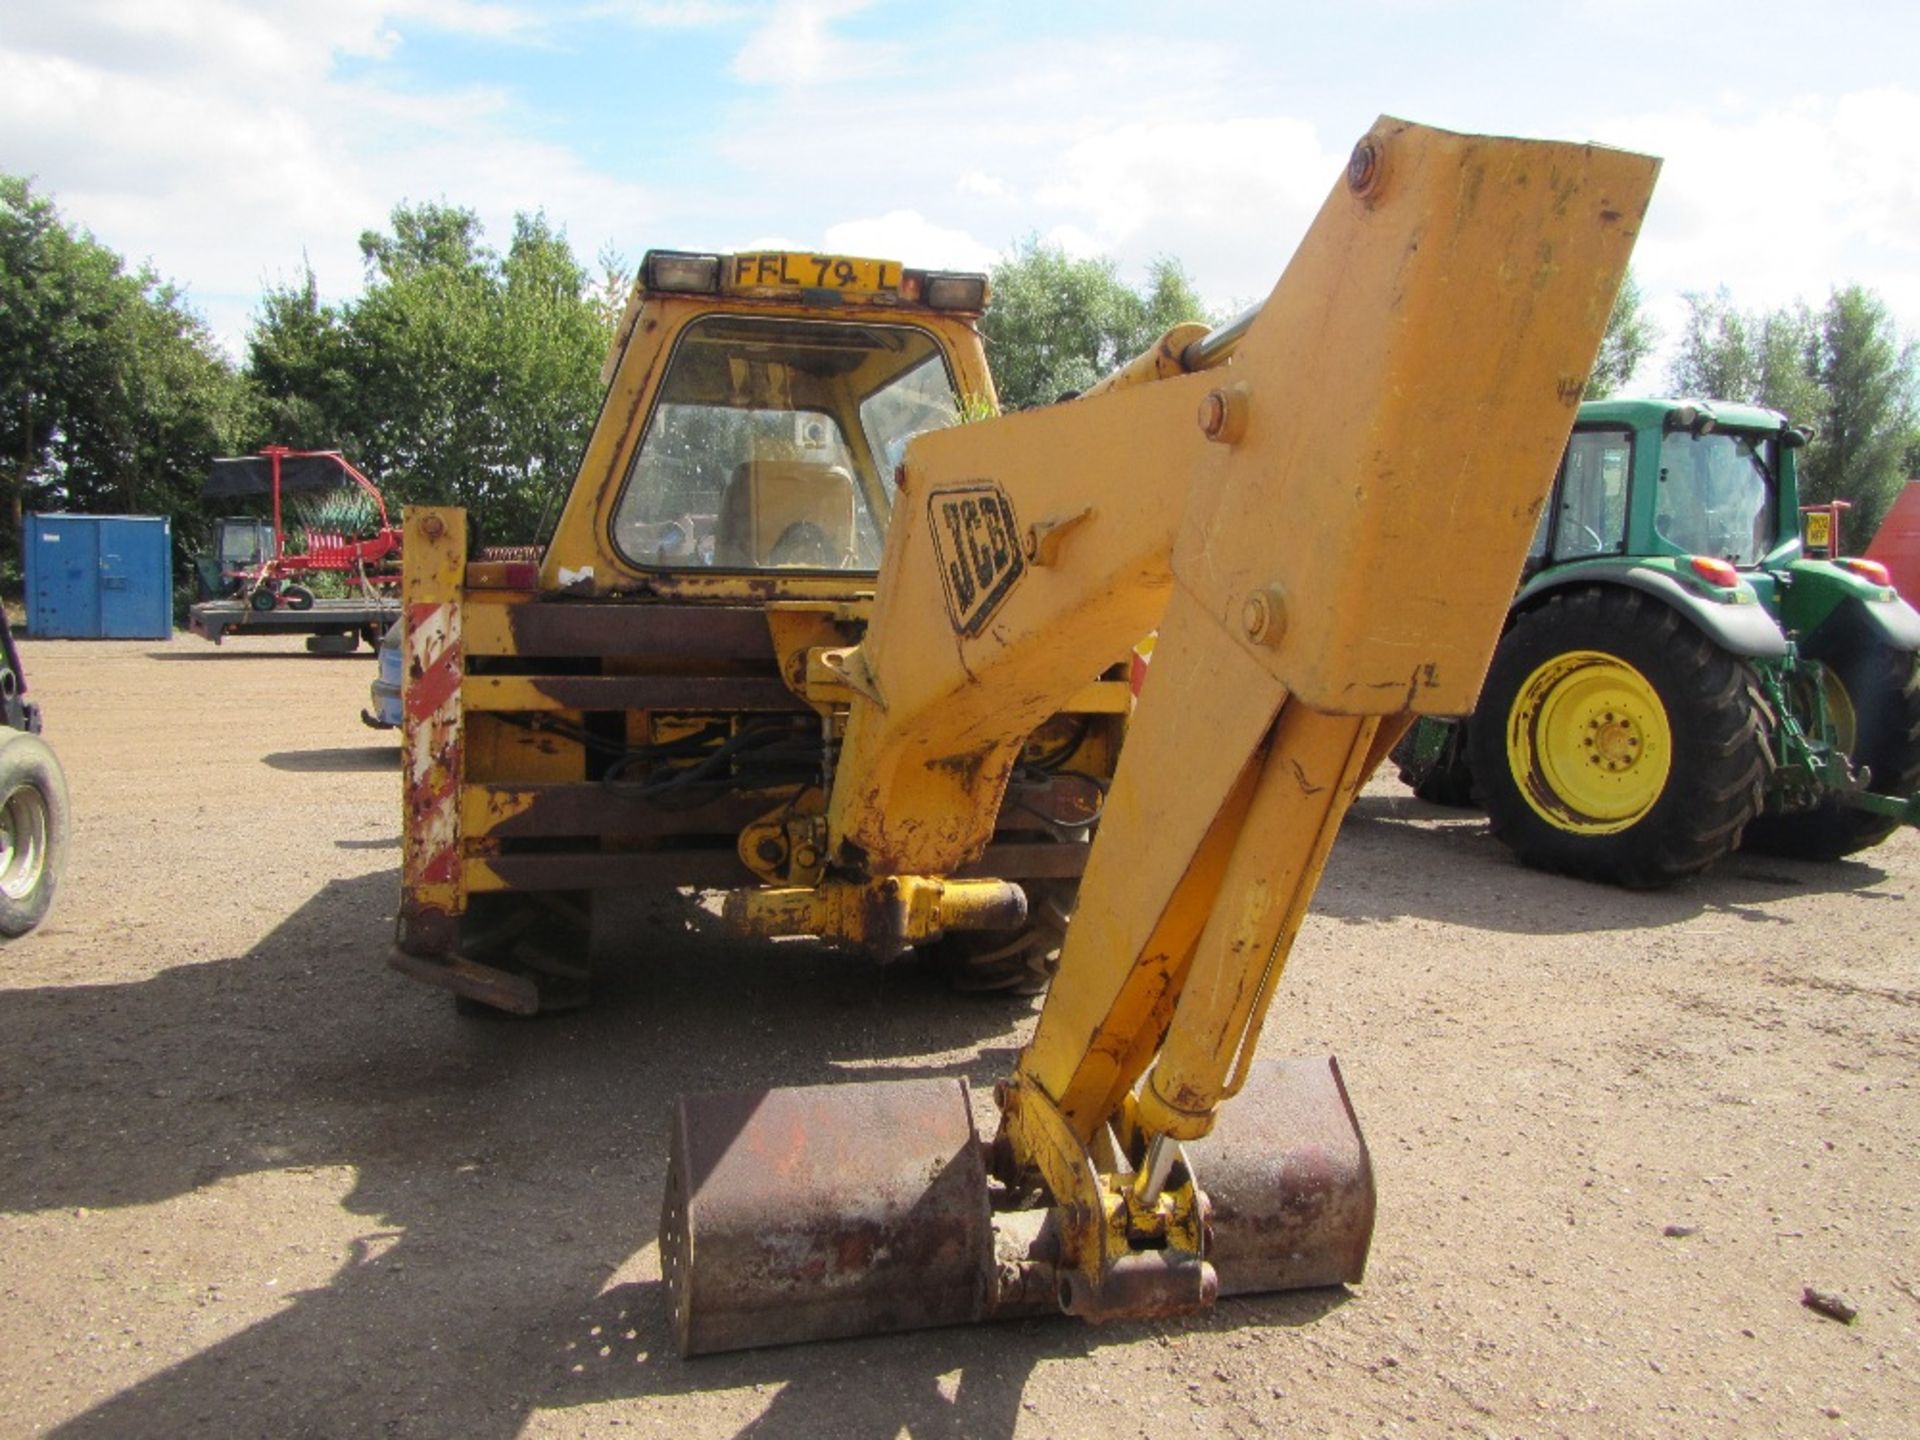 JCB 2C Digger with 4 in 1 & Ditching Bucket. Reg. No. FFL 790L Ser. No. 3C53474 - Image 4 of 4